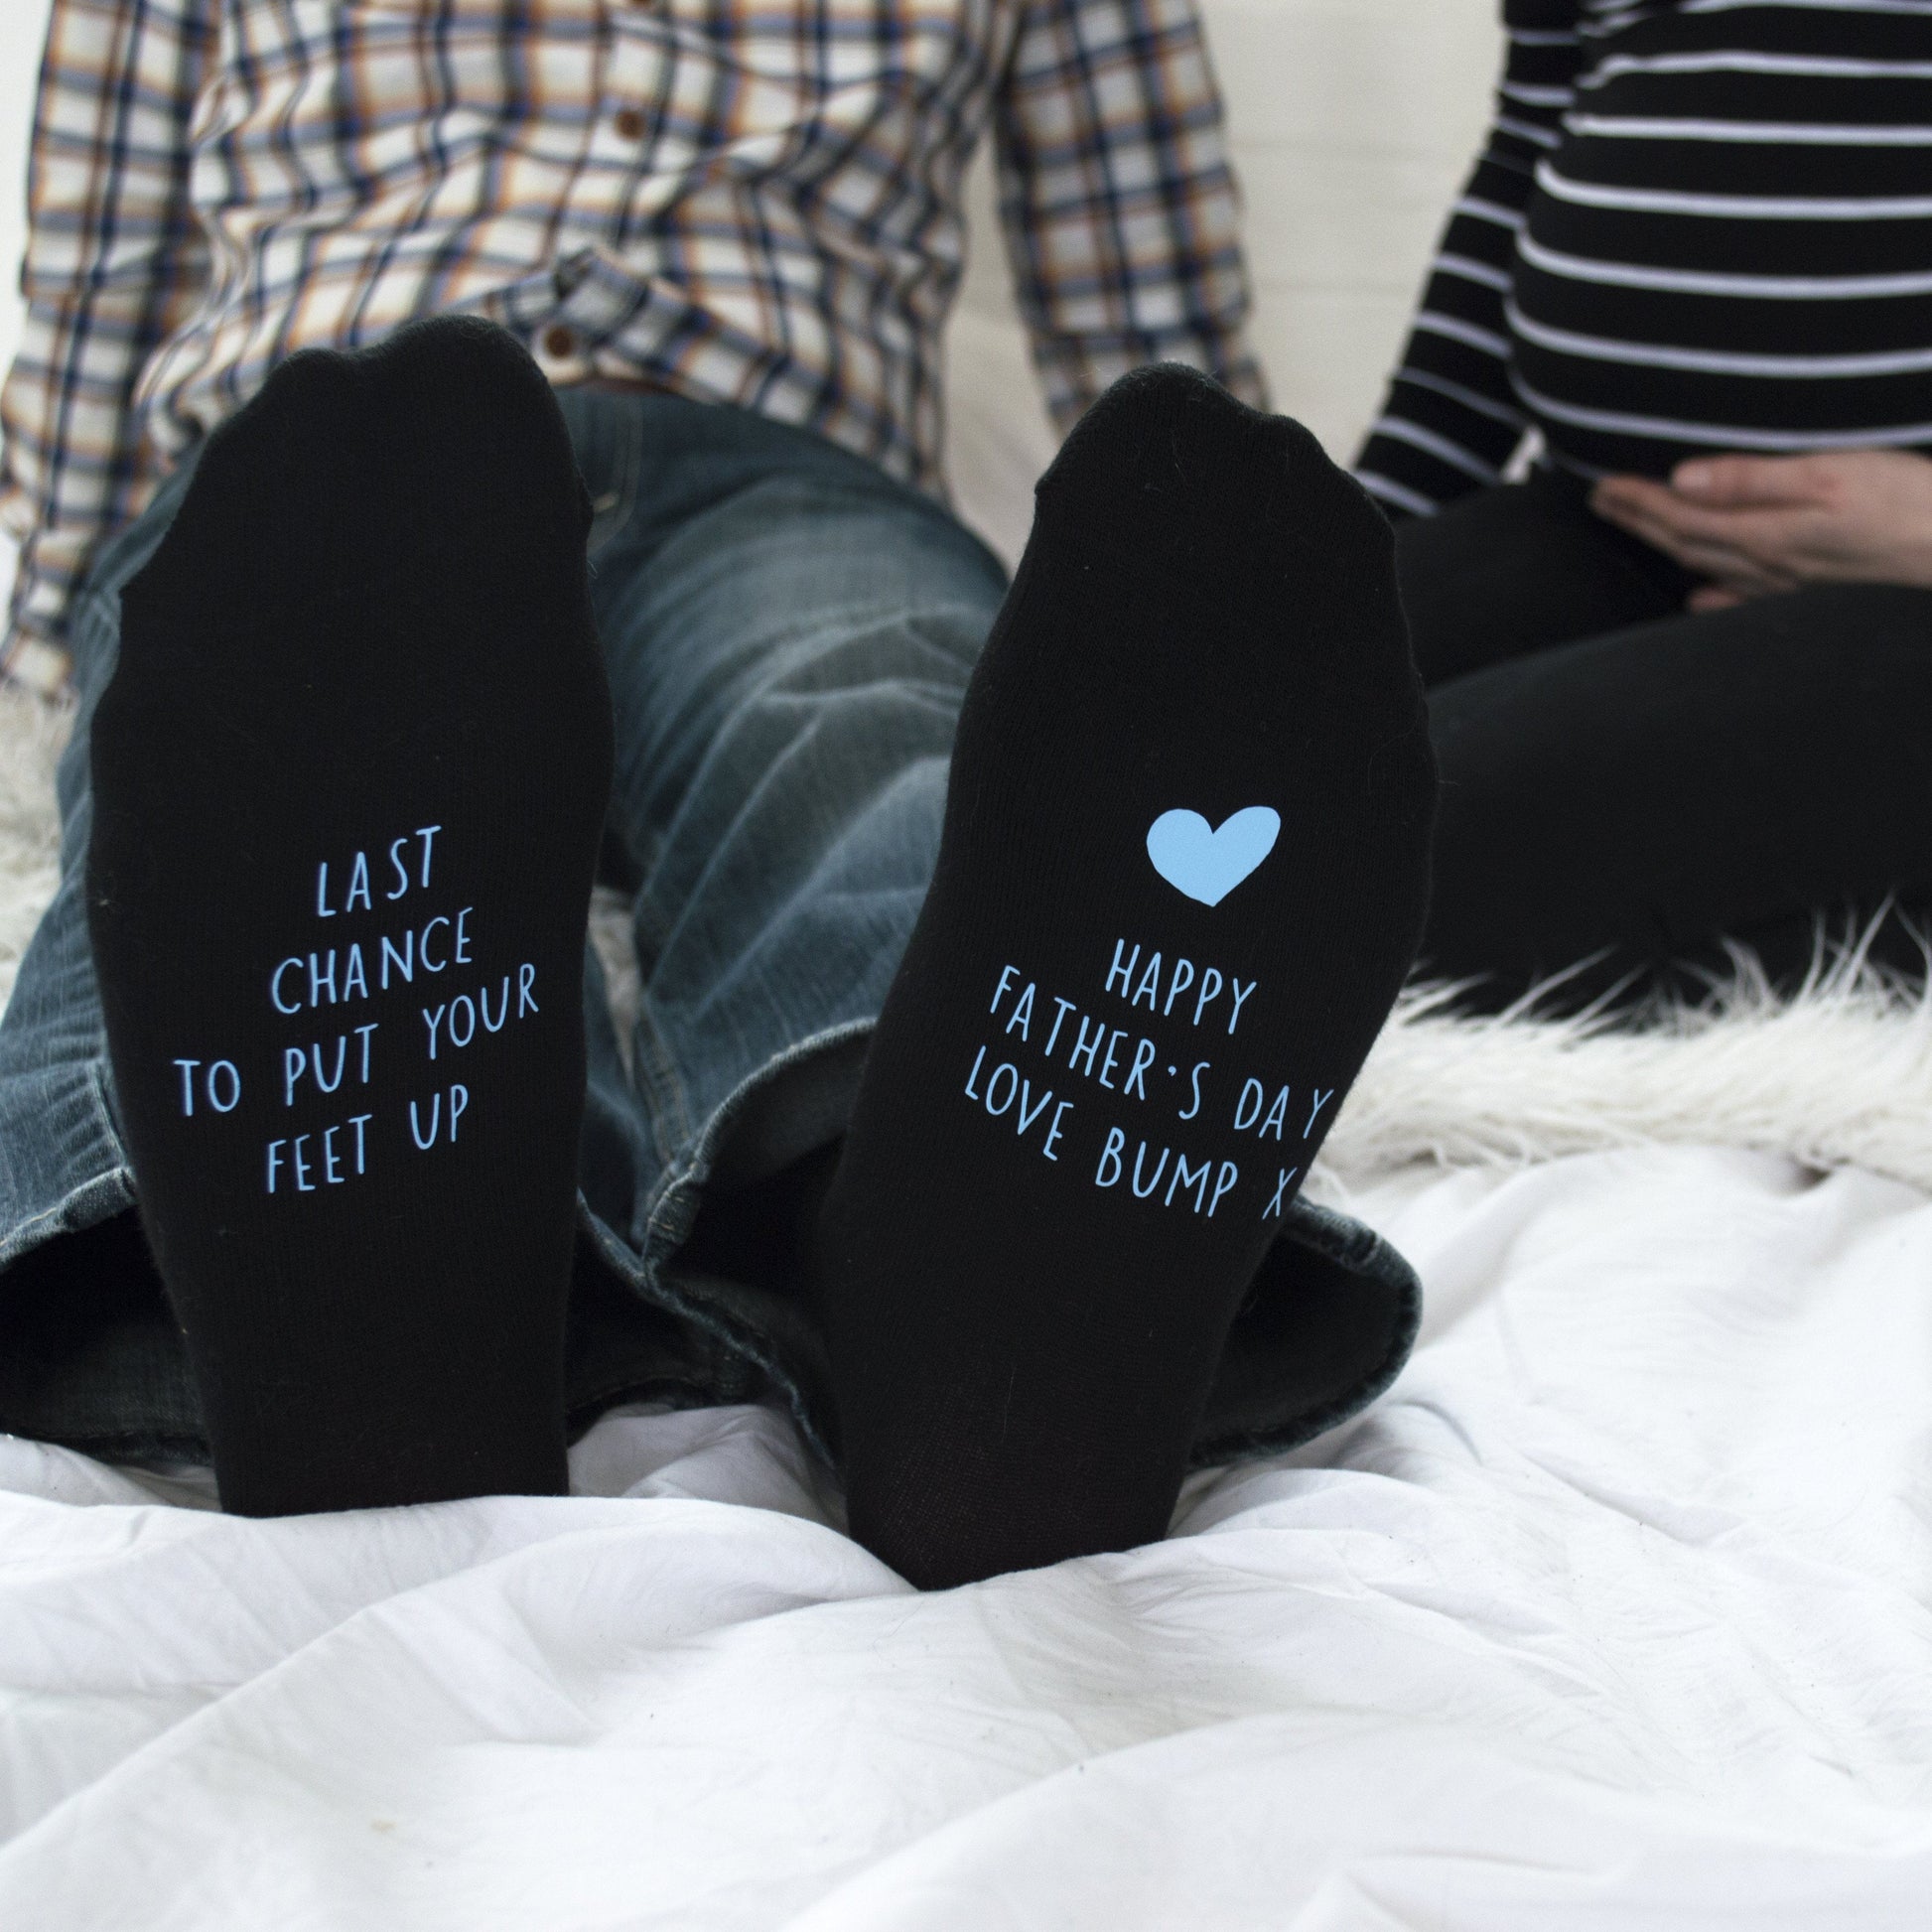 Father's Day From Bump Socks, socks, - ALPHS 